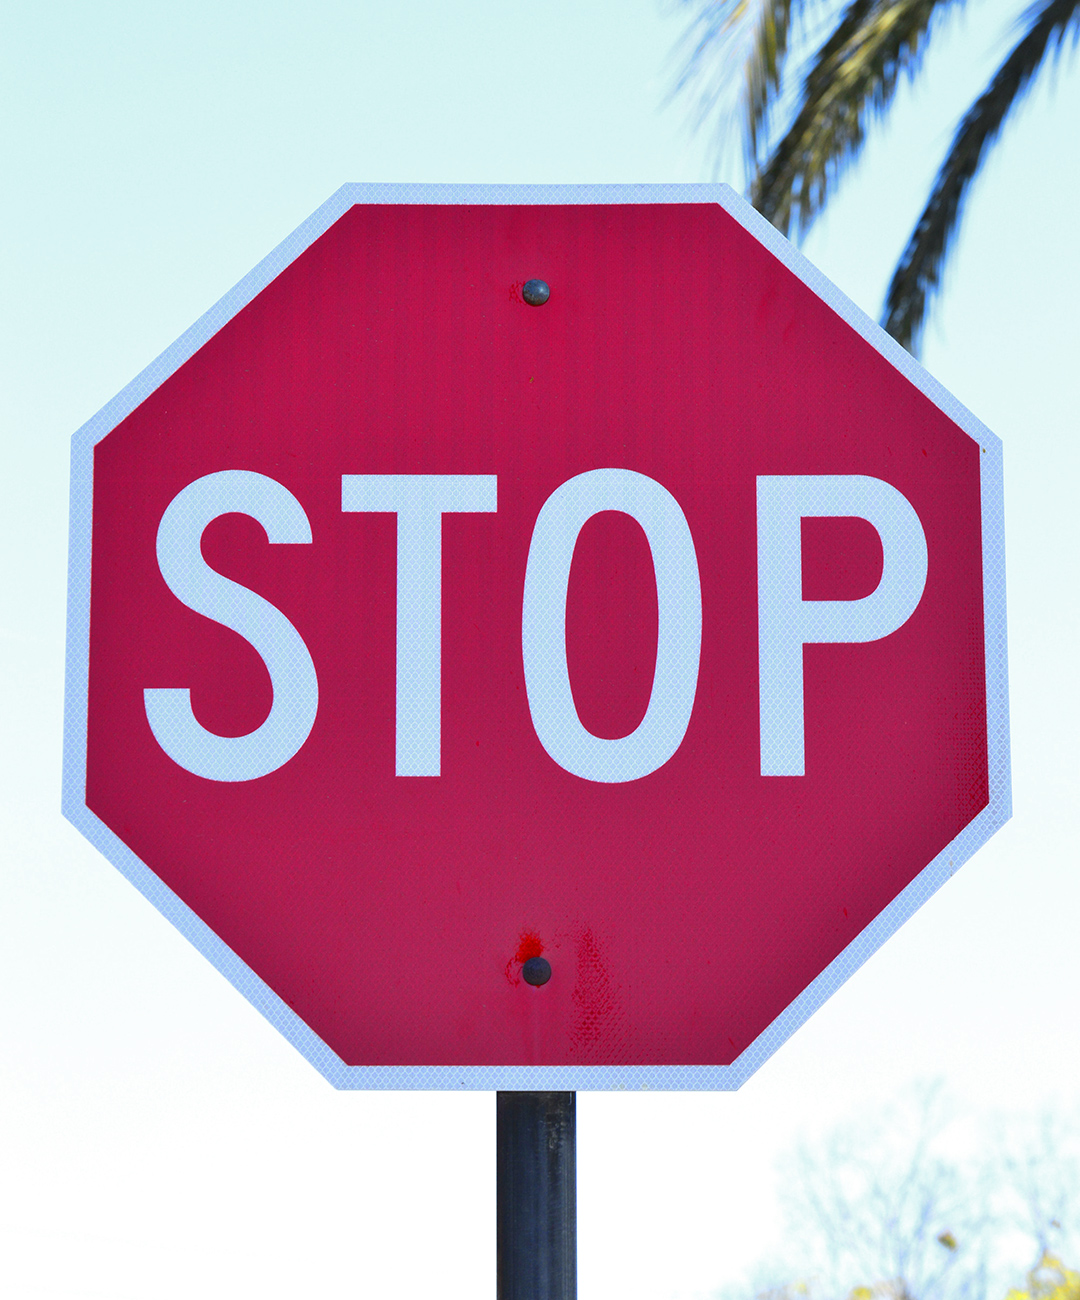 Red Stop traffic sign